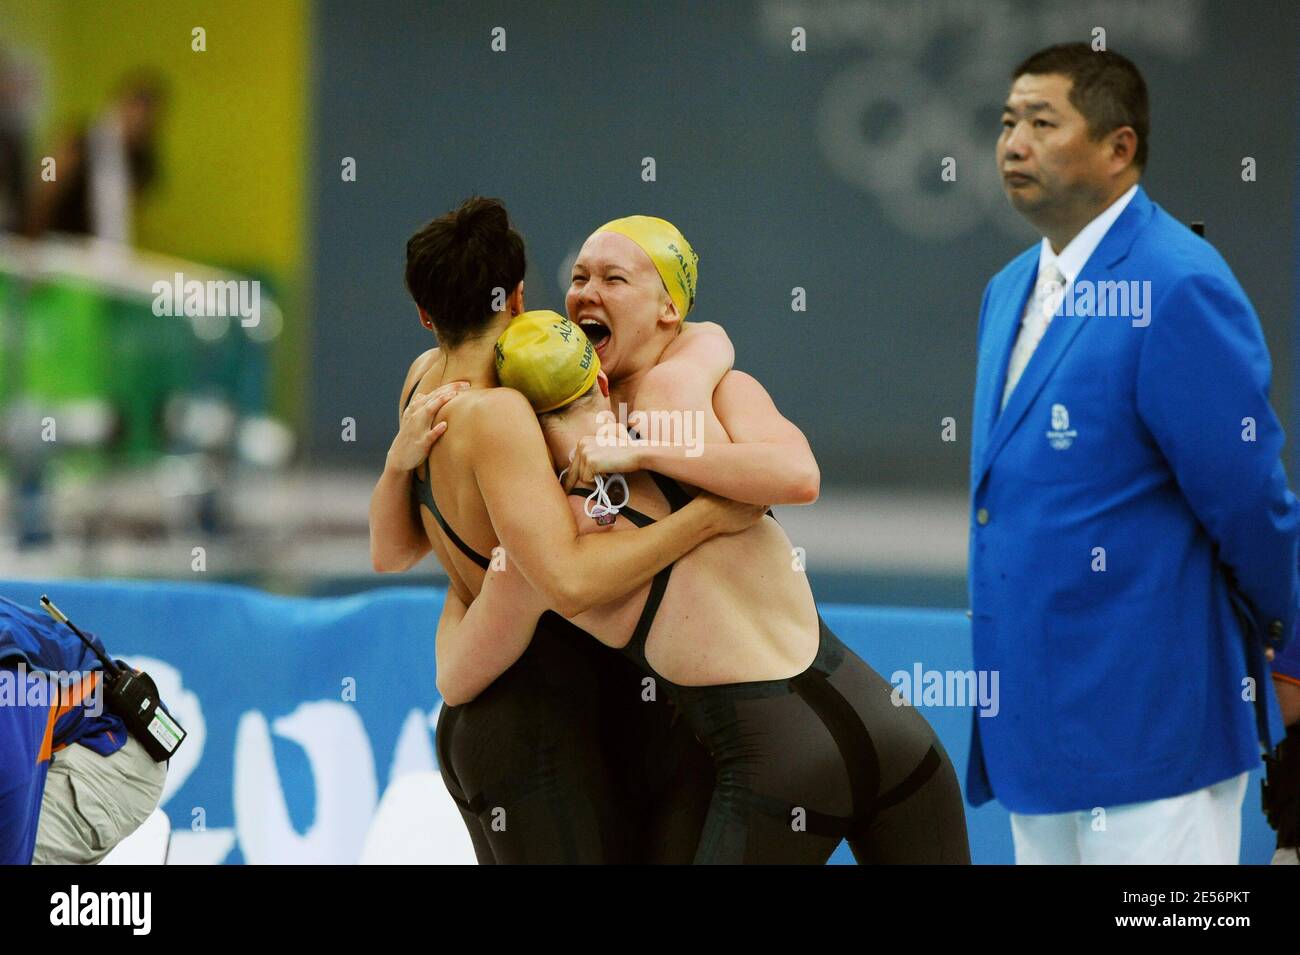 Stephanie Rice, Bronte Barratt,Kylie Palmer and Linda Mackenzie of Australia celebrate winning the Women's 4 x 200m Freestyle Relay Final and the gold medal held at the National Aquatics Centre during the day 6 of the Beijing 2008 Olympic Games on August 14, 2008. The Australian Team finished the race in a time of 7:44.31, a new World Record. Photo by Jing Min/Cameleon/ABACAPRESS.COM Stock Photo